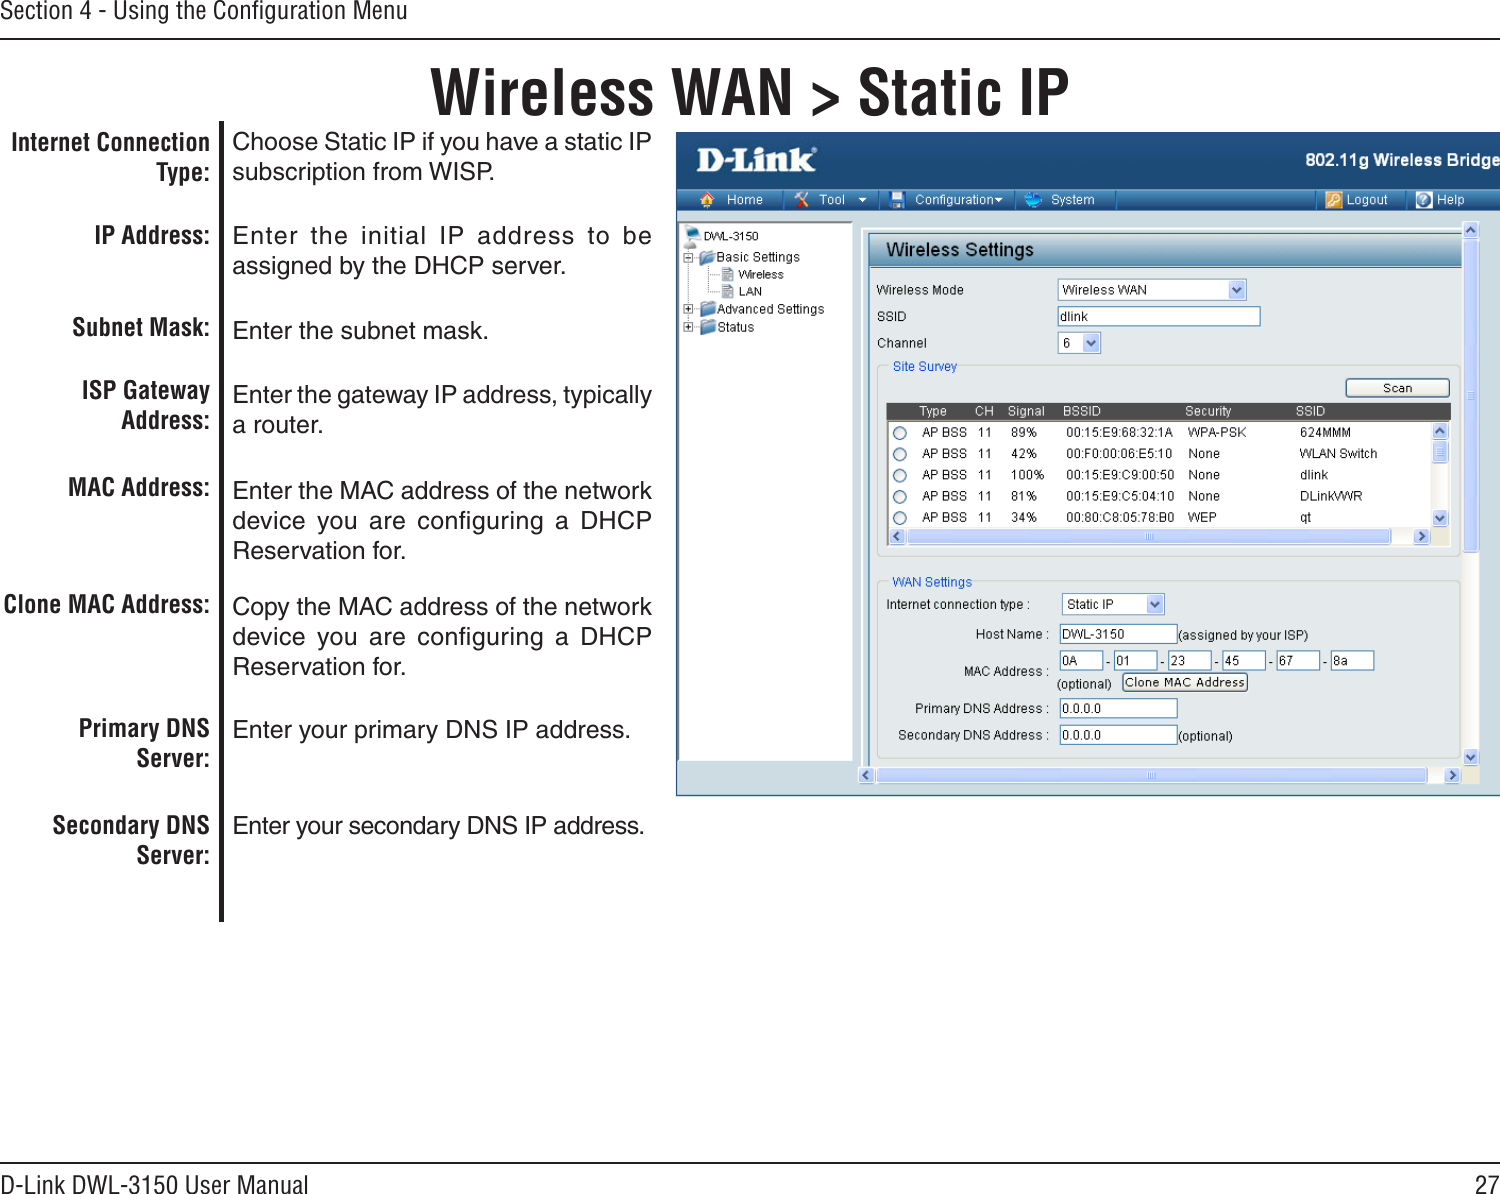 27D-Link DWL-3150 User ManualSection 4 - Using the Conﬁguration MenuWireless WAN &gt; Static IPChoose Static IP if you have a static IP subscription from WISP. Enter  the  initial  IP  address  to  be assigned by the DHCP server.Enter the subnet mask.Enter the gateway IP address, typically a router.Enter the MAC address of the network device  you are  conﬁguring  a  DHCP Reservation for.Copy the MAC address of the network device  you are  conﬁguring  a  DHCP Reservation for.  Enter your primary DNS IP address.Enter your secondary DNS IP address.Internet Connection Type:IP Address:Subnet Mask:ISP Gateway Address:MAC Address:Clone MAC Address:Primary DNS Server:Secondary DNS Server: